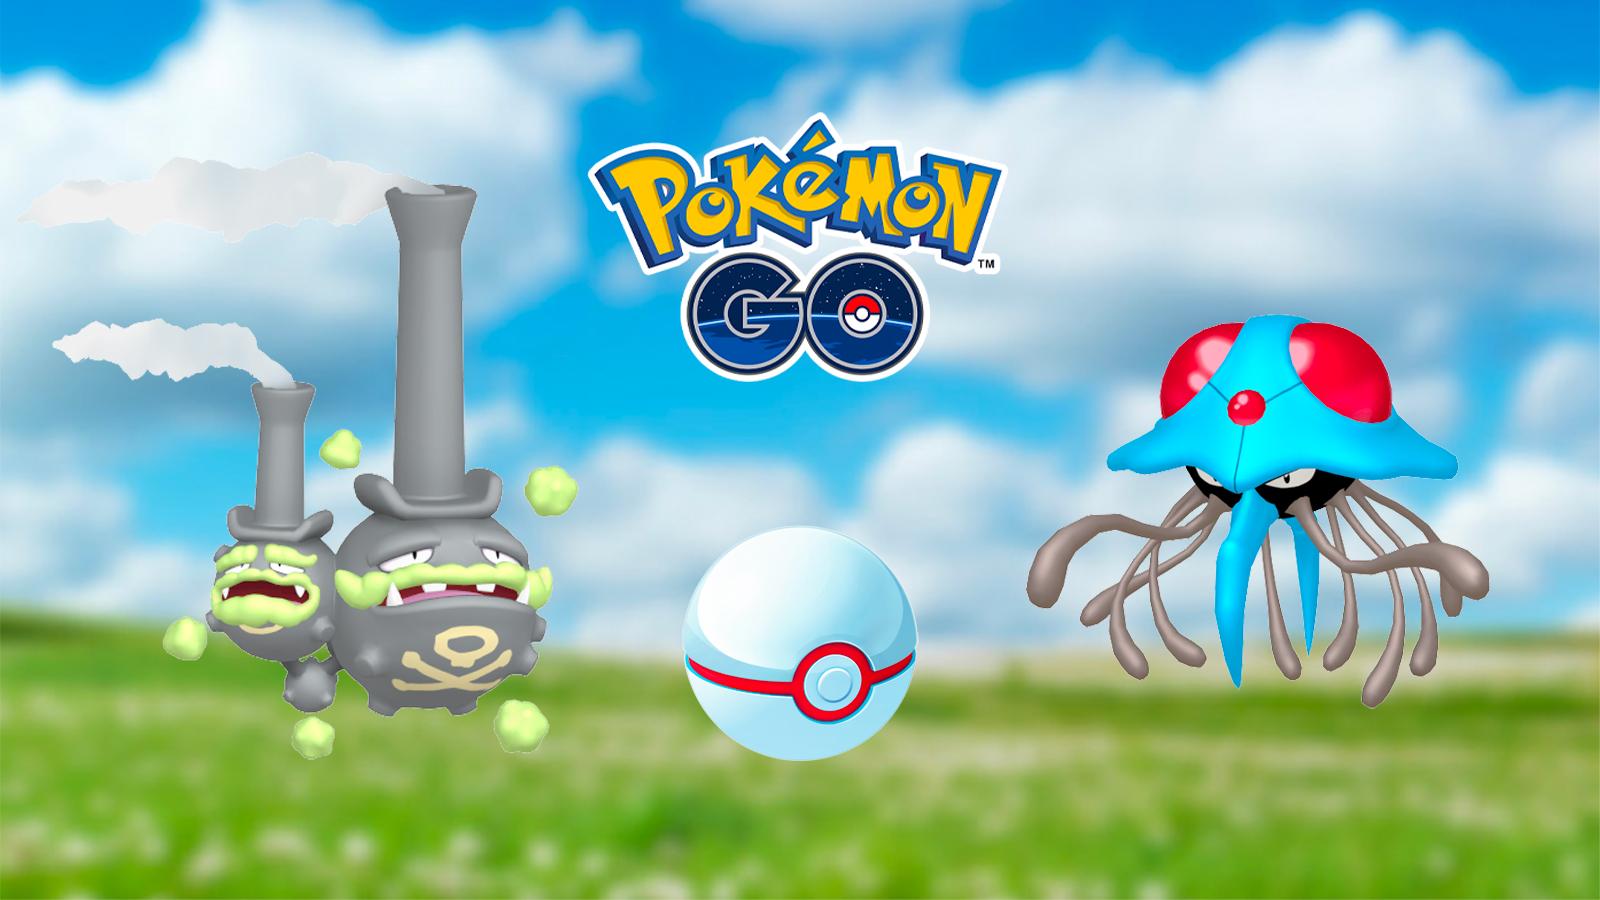 Tentacruel appearing in the Pokemon Go Spring Cup